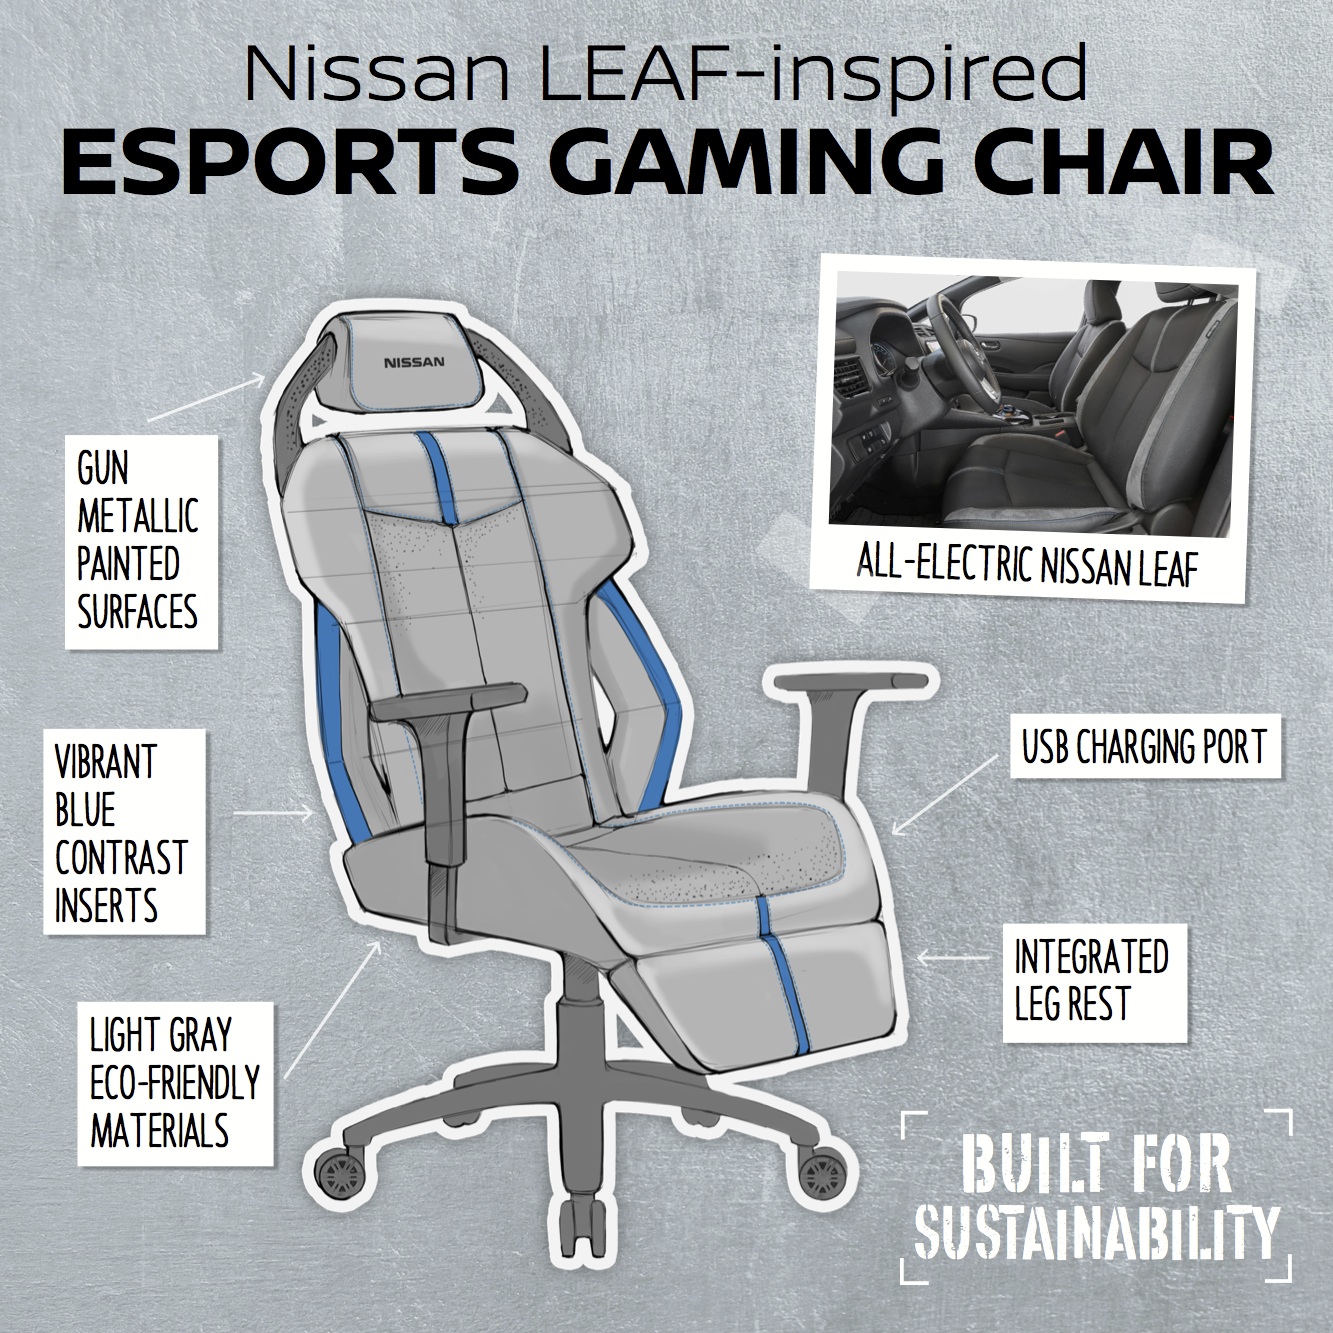 Nissan's ultimate esports gaming chairs - LEAF-source